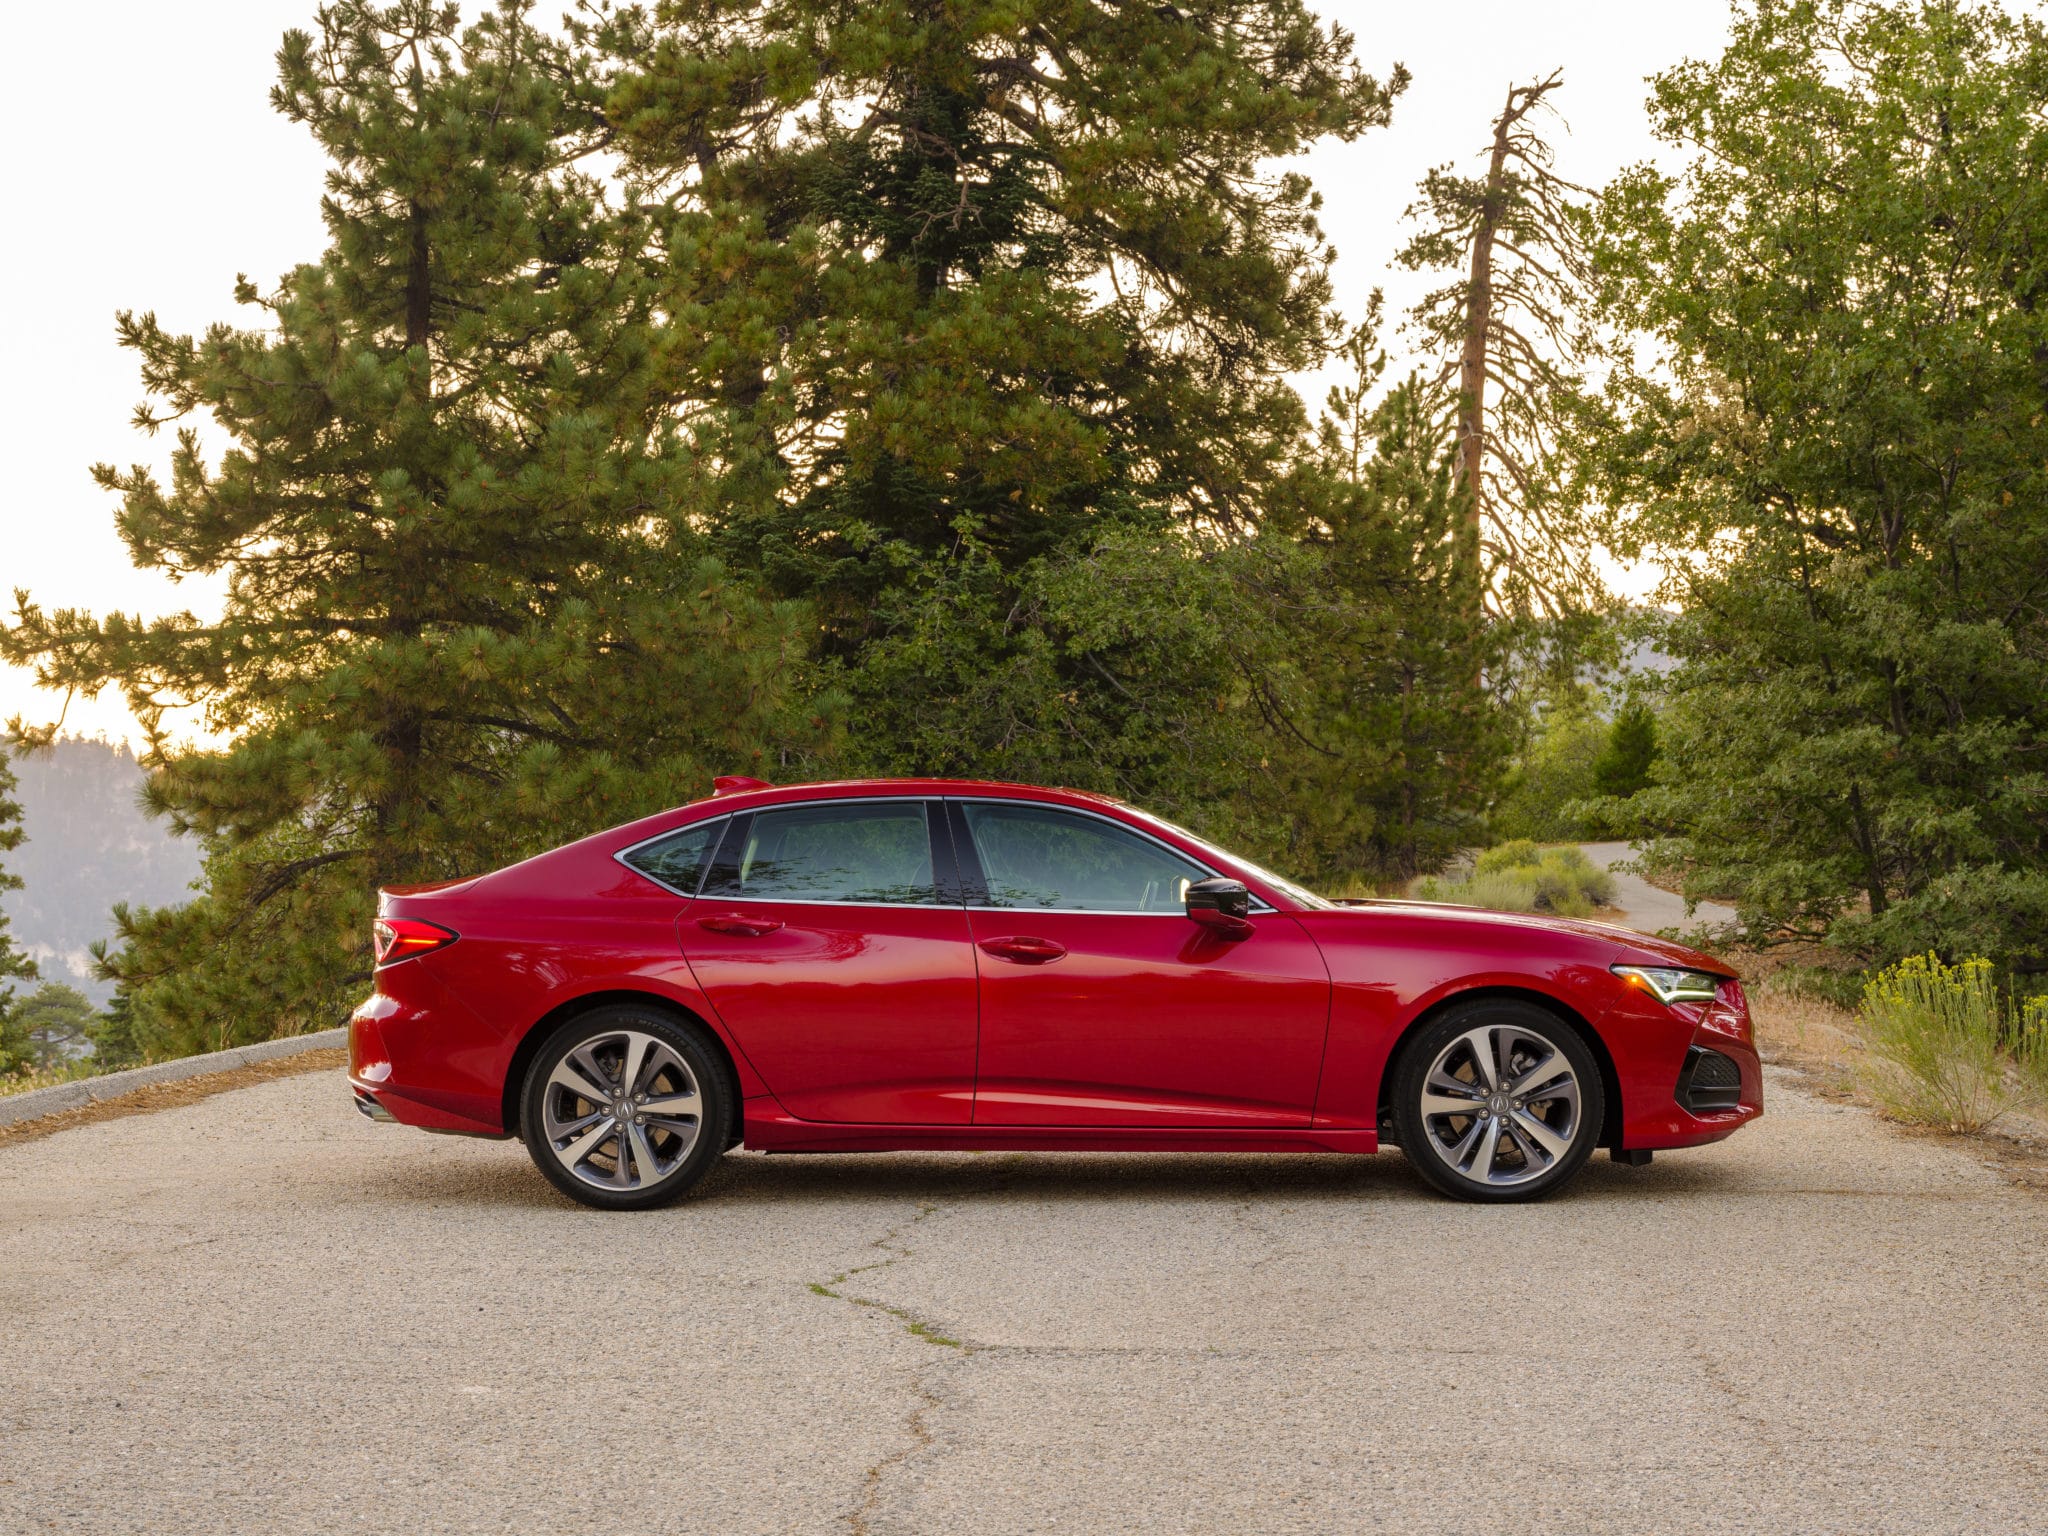 Red 2021 TLX parked in the middle of the road, with trees in the background